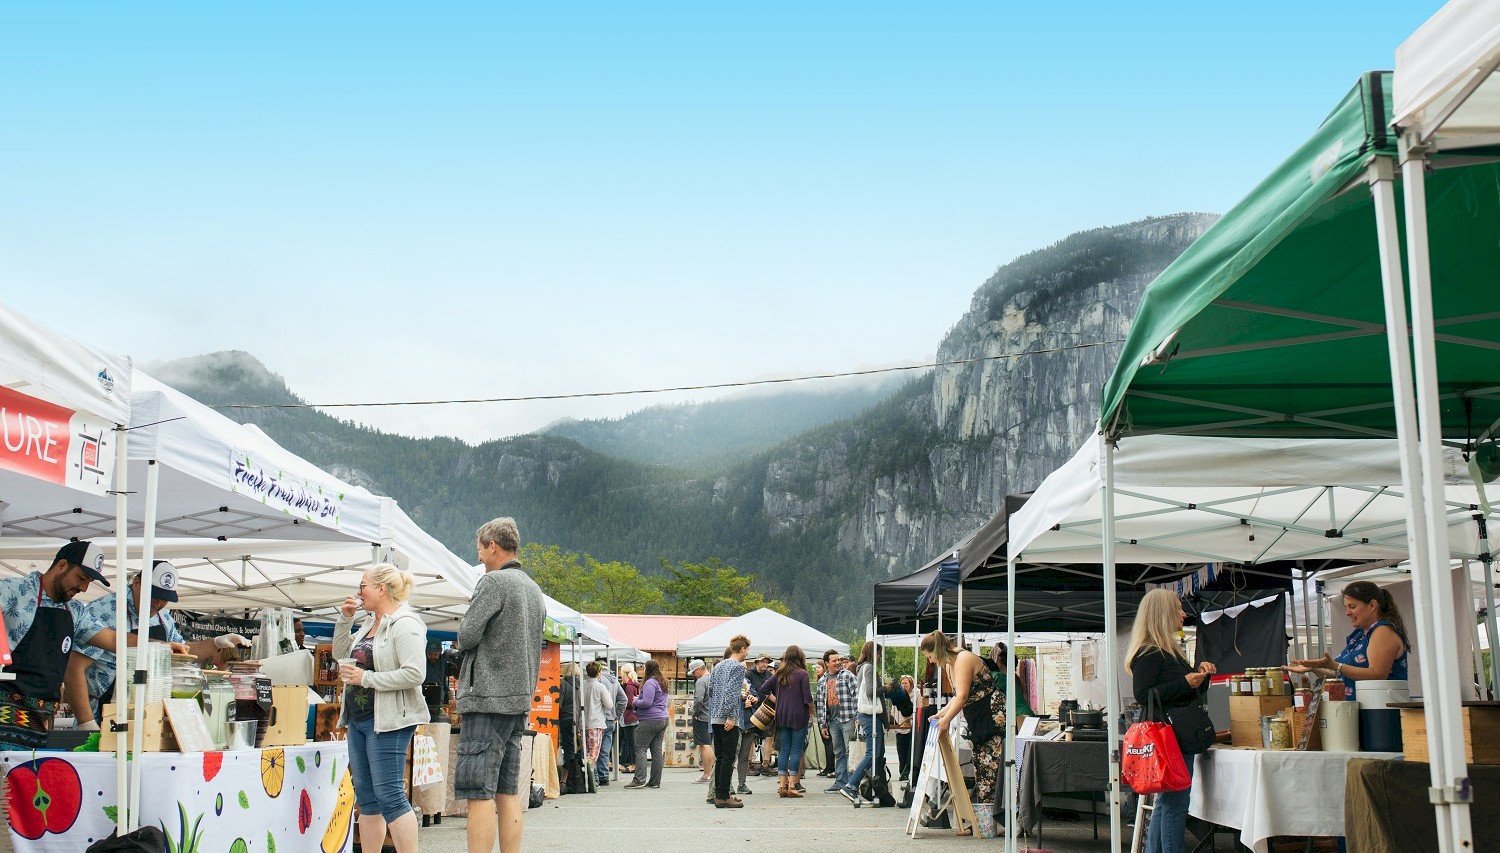 An Insiders Guide to the Squamish Farmer's Market